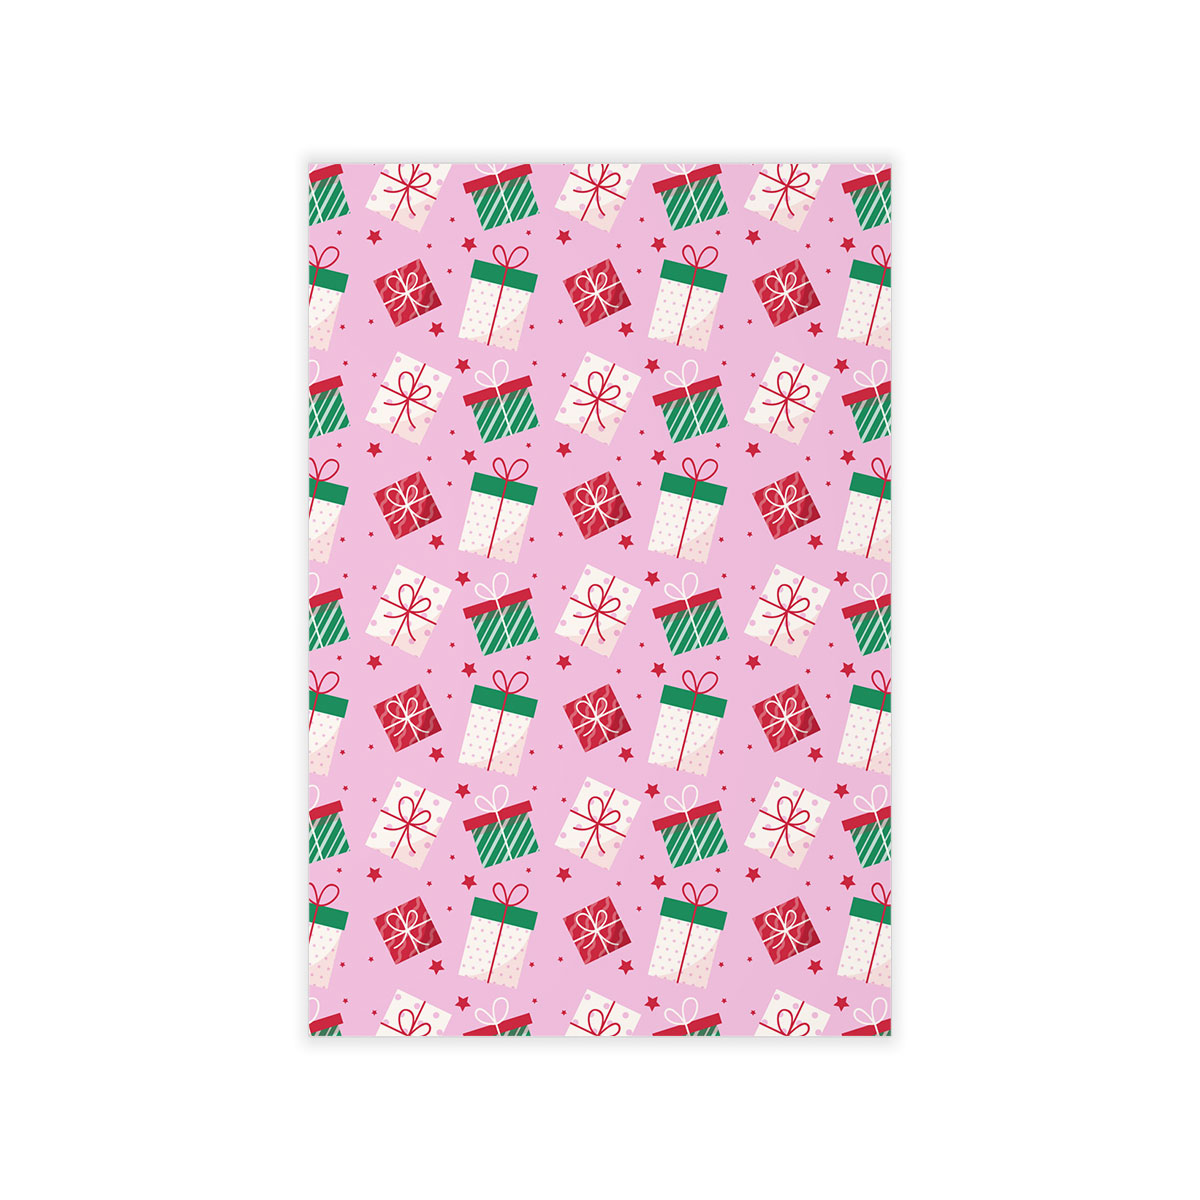 Red Green And White Christmas Gift On Pink Background Wall Decals